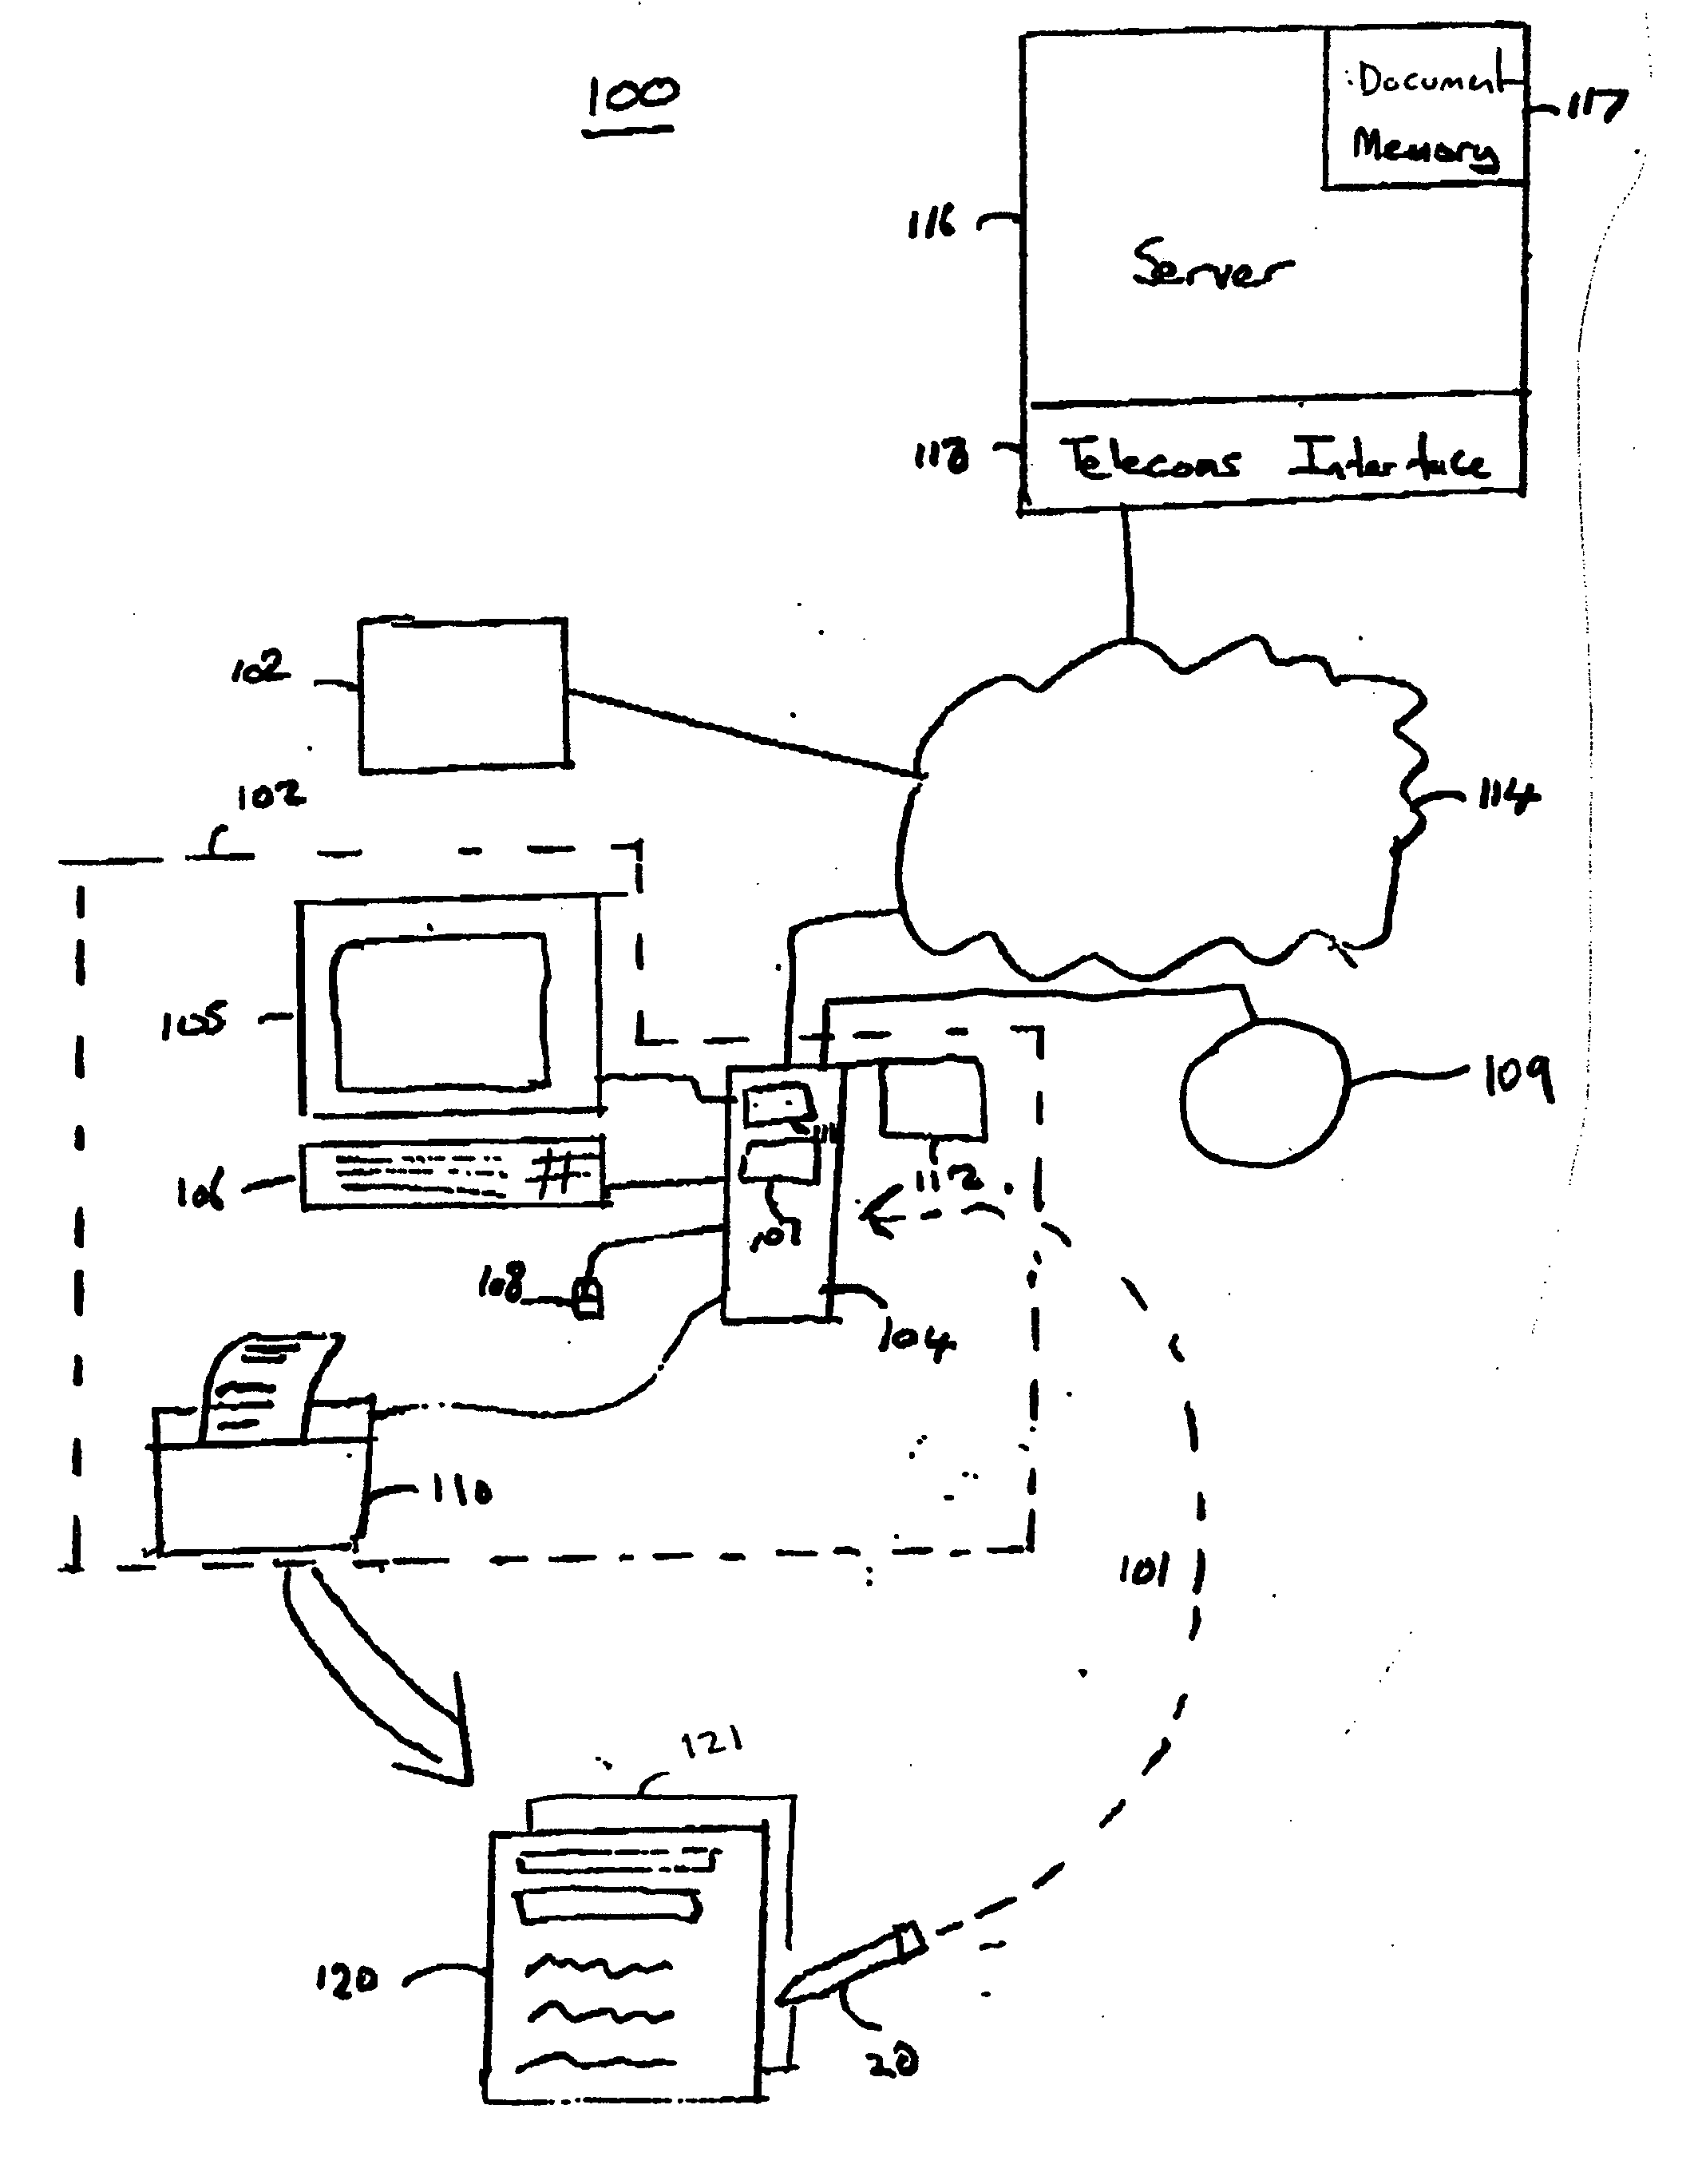 Associating electronic documents, and apparatus, methods and software relating to such activities